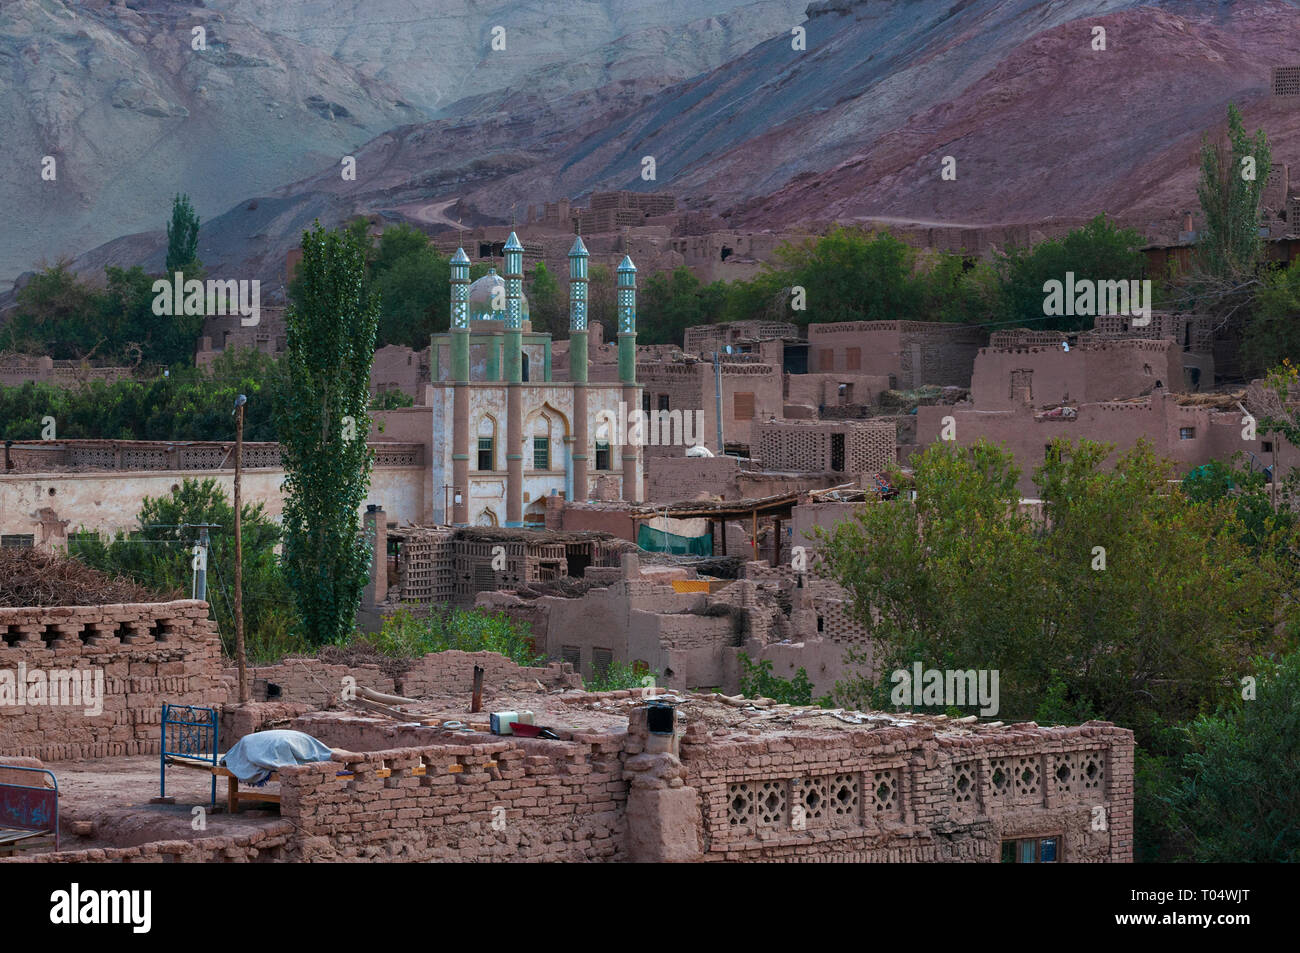 View of the Uyghur village of Tuyog, with a mosque and mountains on the background, Xinjiang region, China. Stock Photo